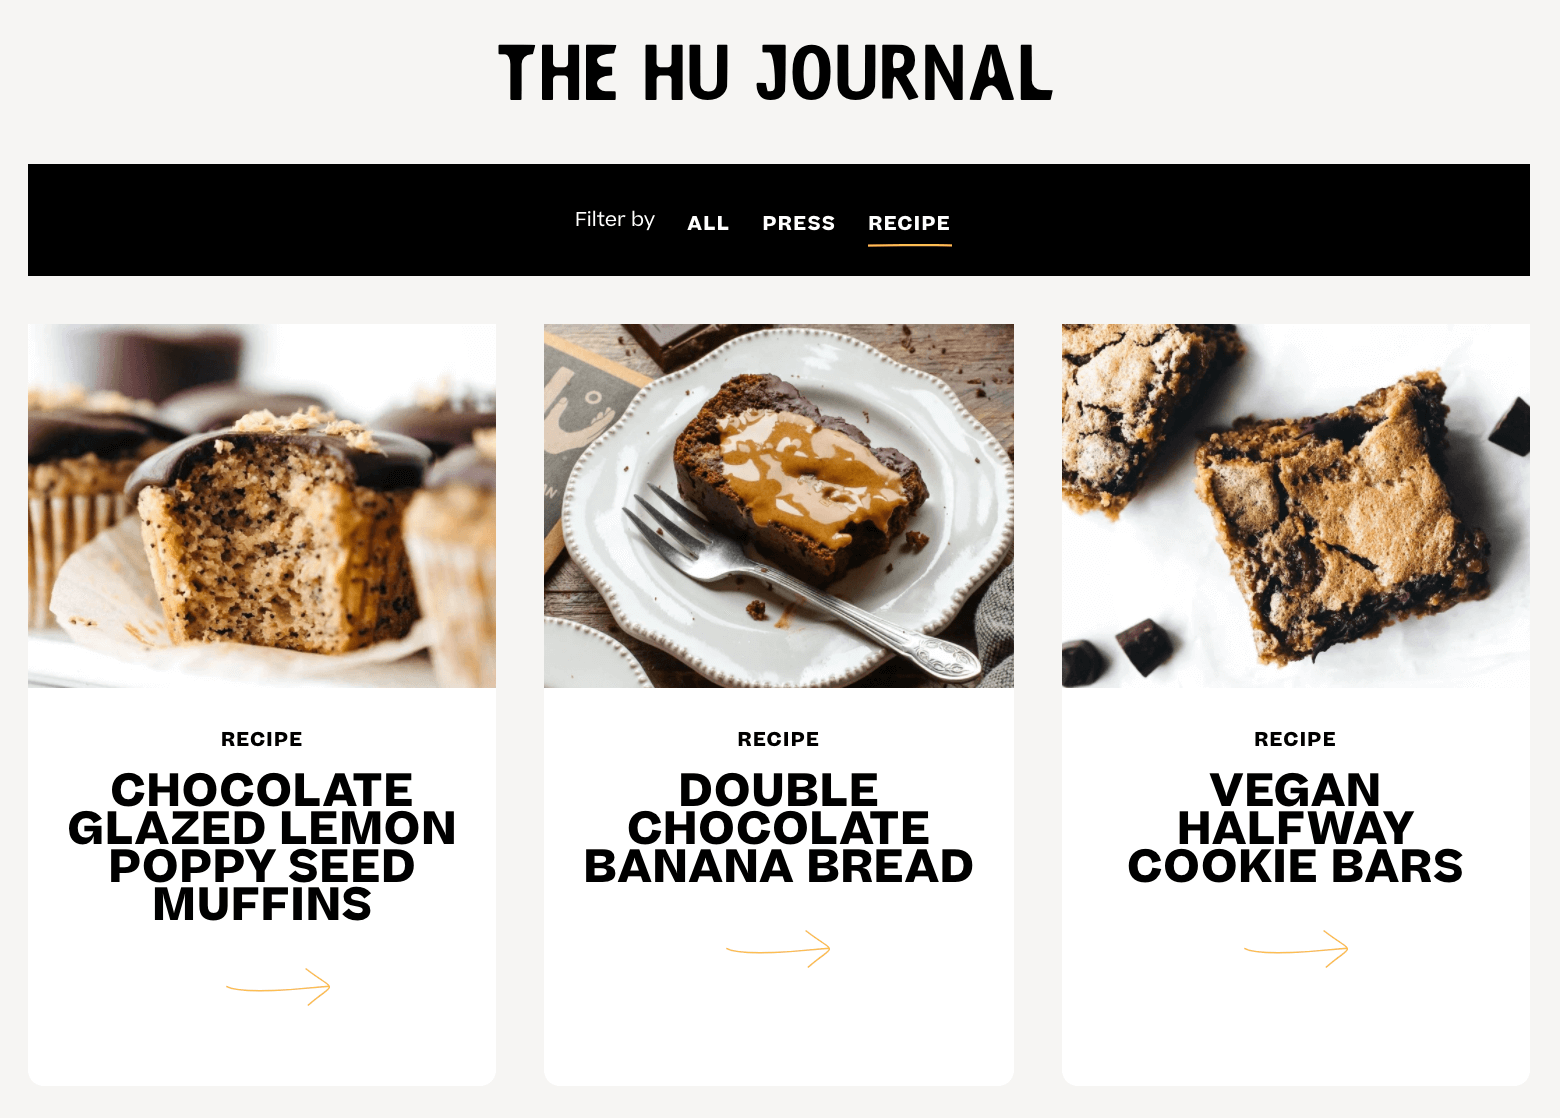 Hu has dedicated recipe blogs that highlight the number of different ways their product can be used